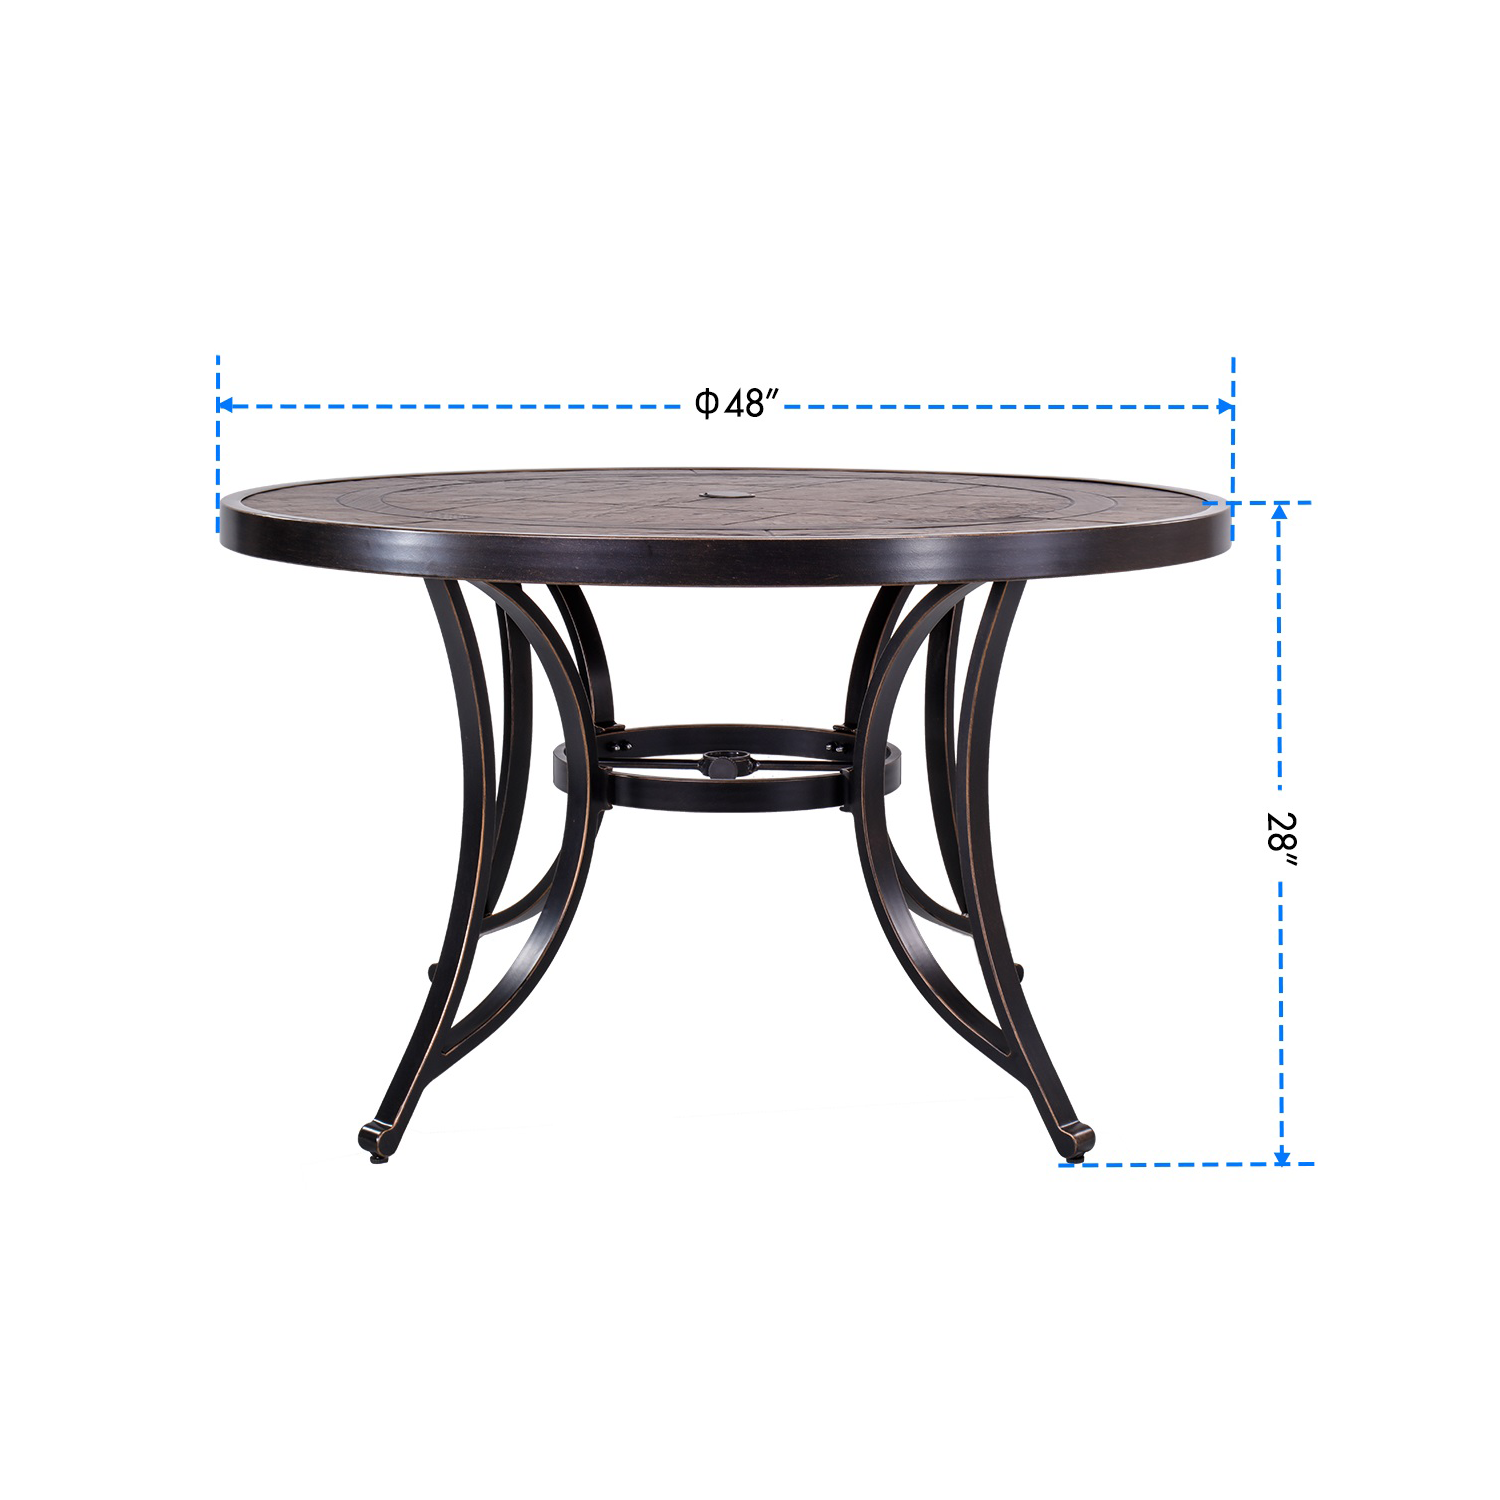 Set of 3 Patio Furniture 48" Round Dining Table Waterproof Rustproof Outdoor Garden Backyard Furniture with 2PCS 360 Degree Rotating Patio Glider Chairs Aluminum Garden Backyard Outdoor Furniture - image 2 of 6